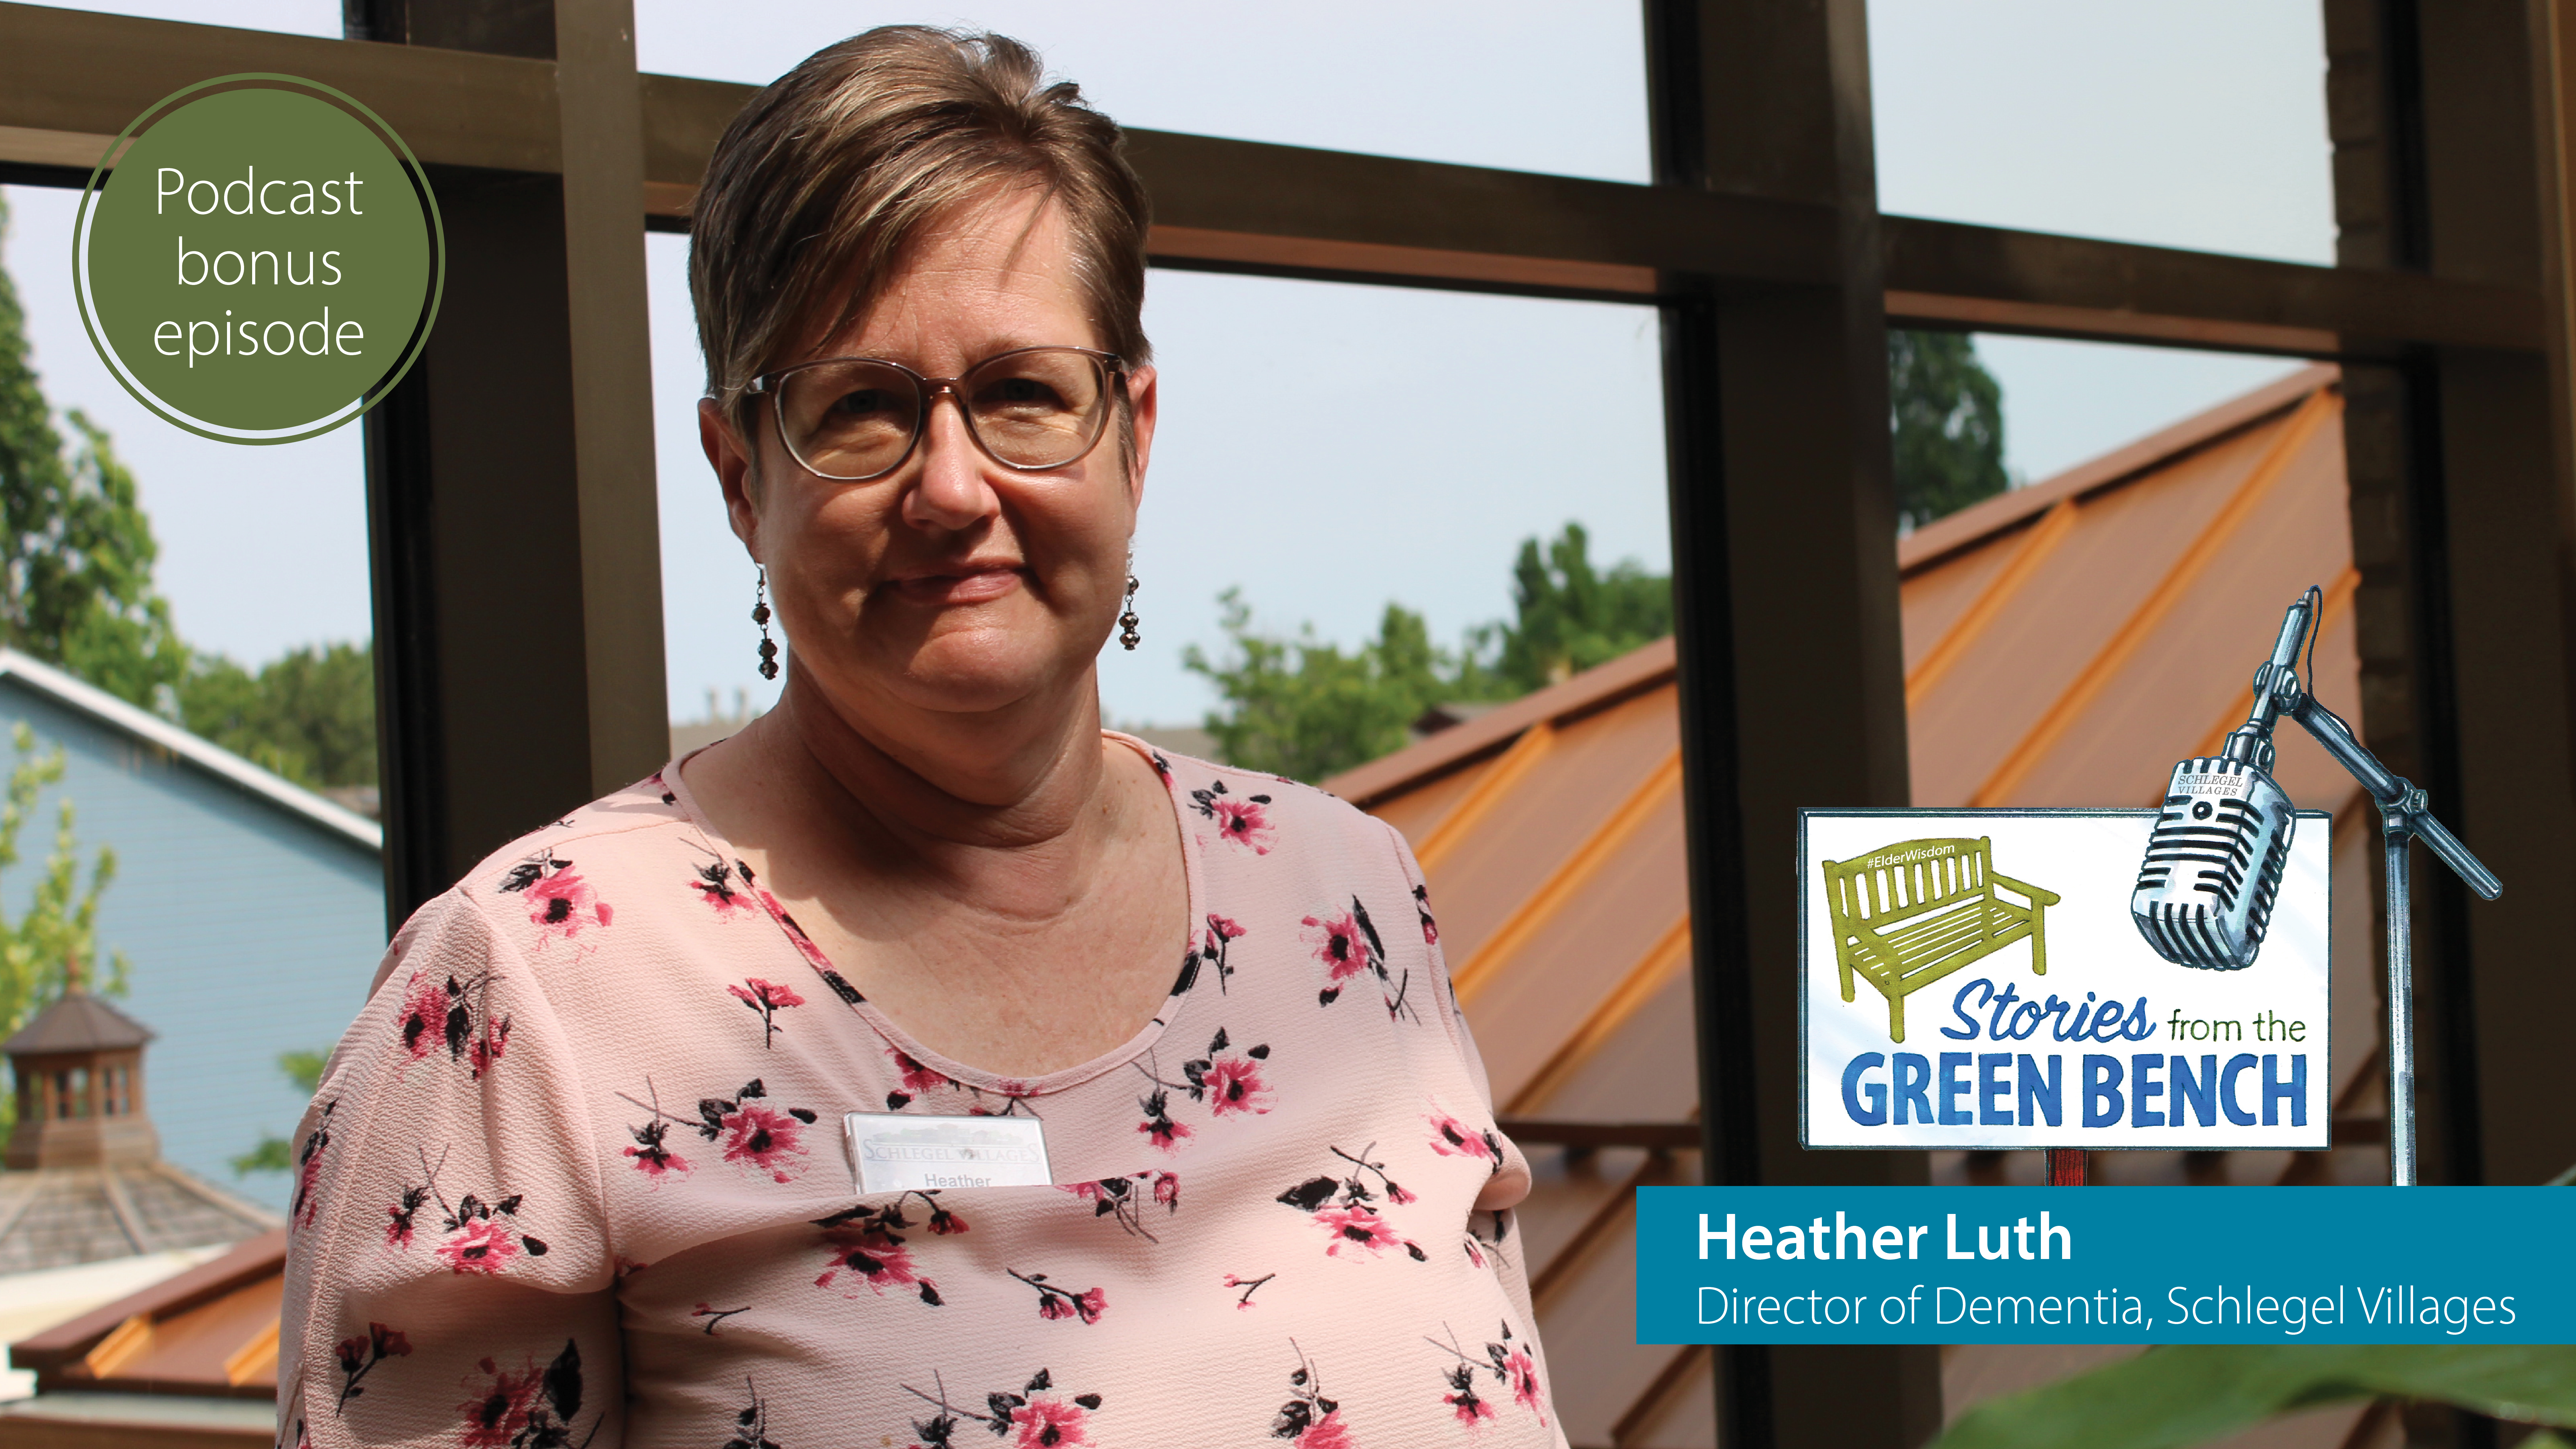 Heather Luth shares about the Living In My Today Dementia Philosophy at Schlegel Villages